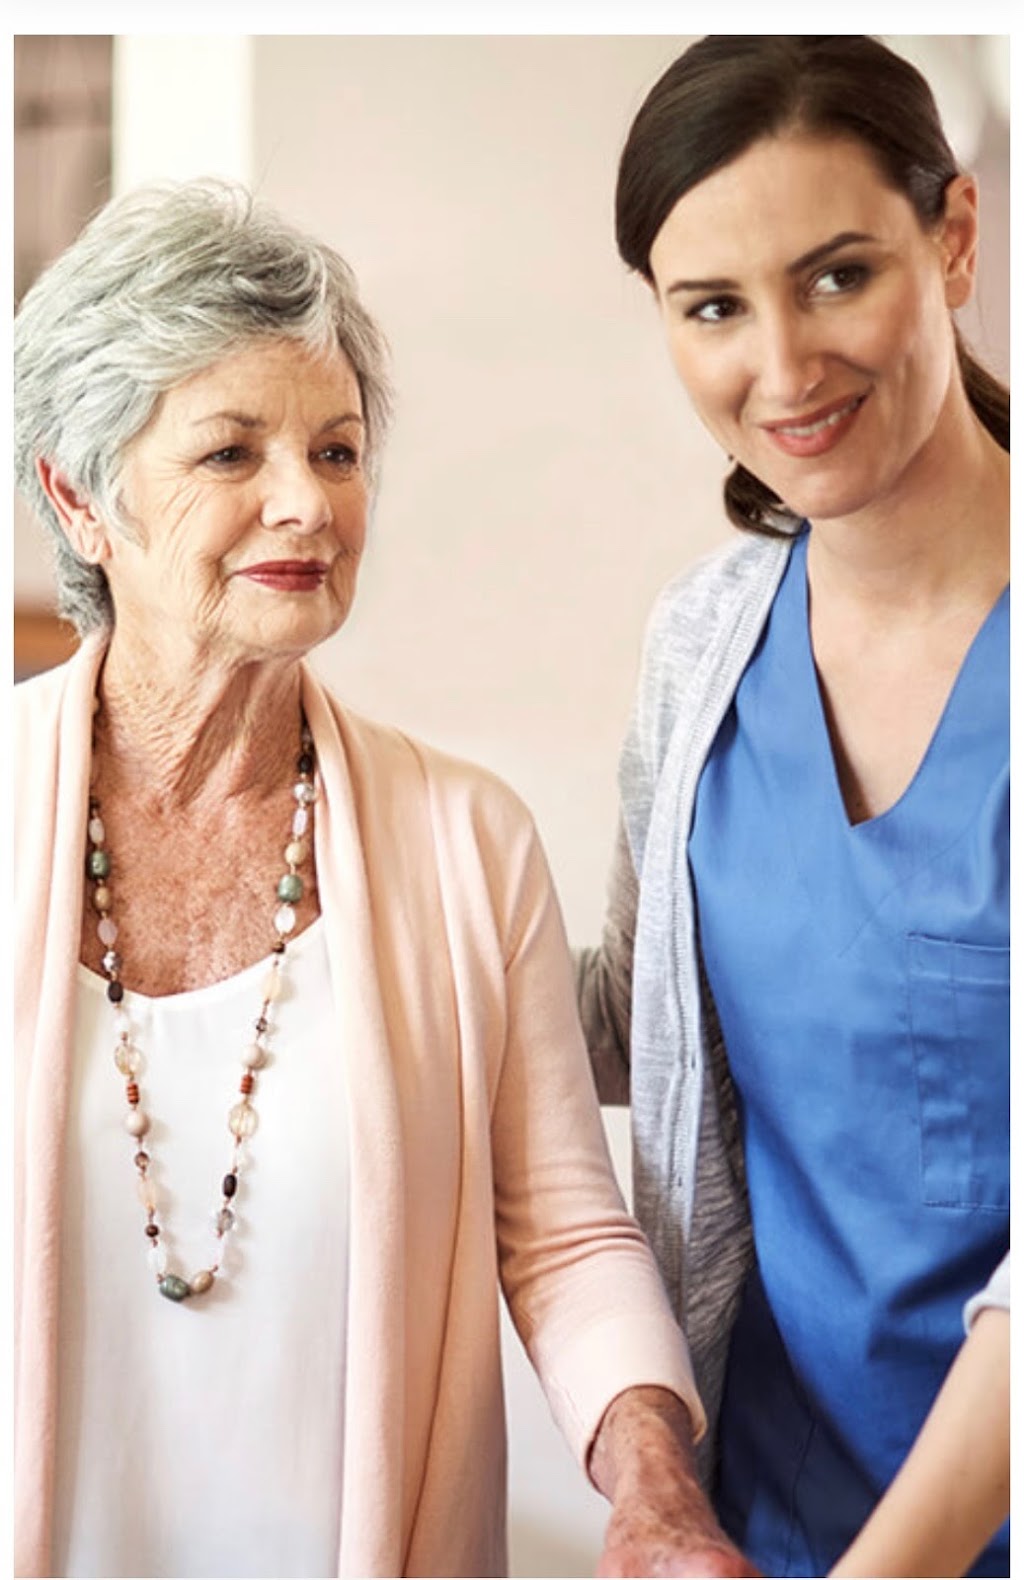 Silverline Staff Home Health | 39510 Paseo Padre Pkwy #220, Fremont, CA 94538 | Phone: (925) 476-5350